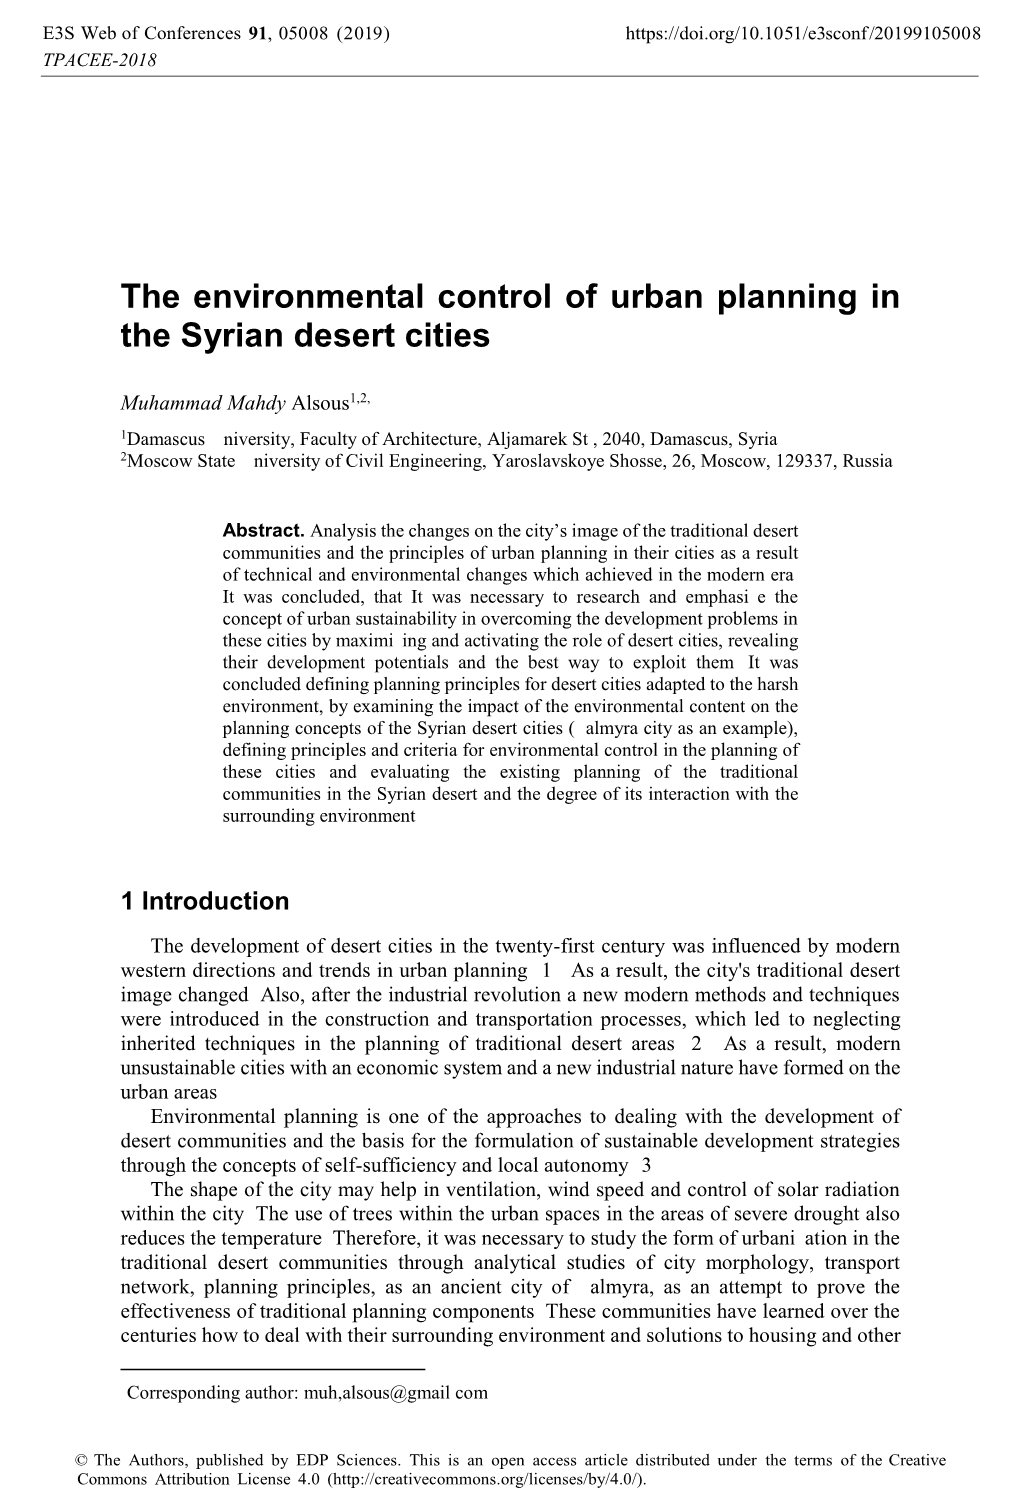 The Environmental Control of Urban Planning in the Syrian Desert Cities